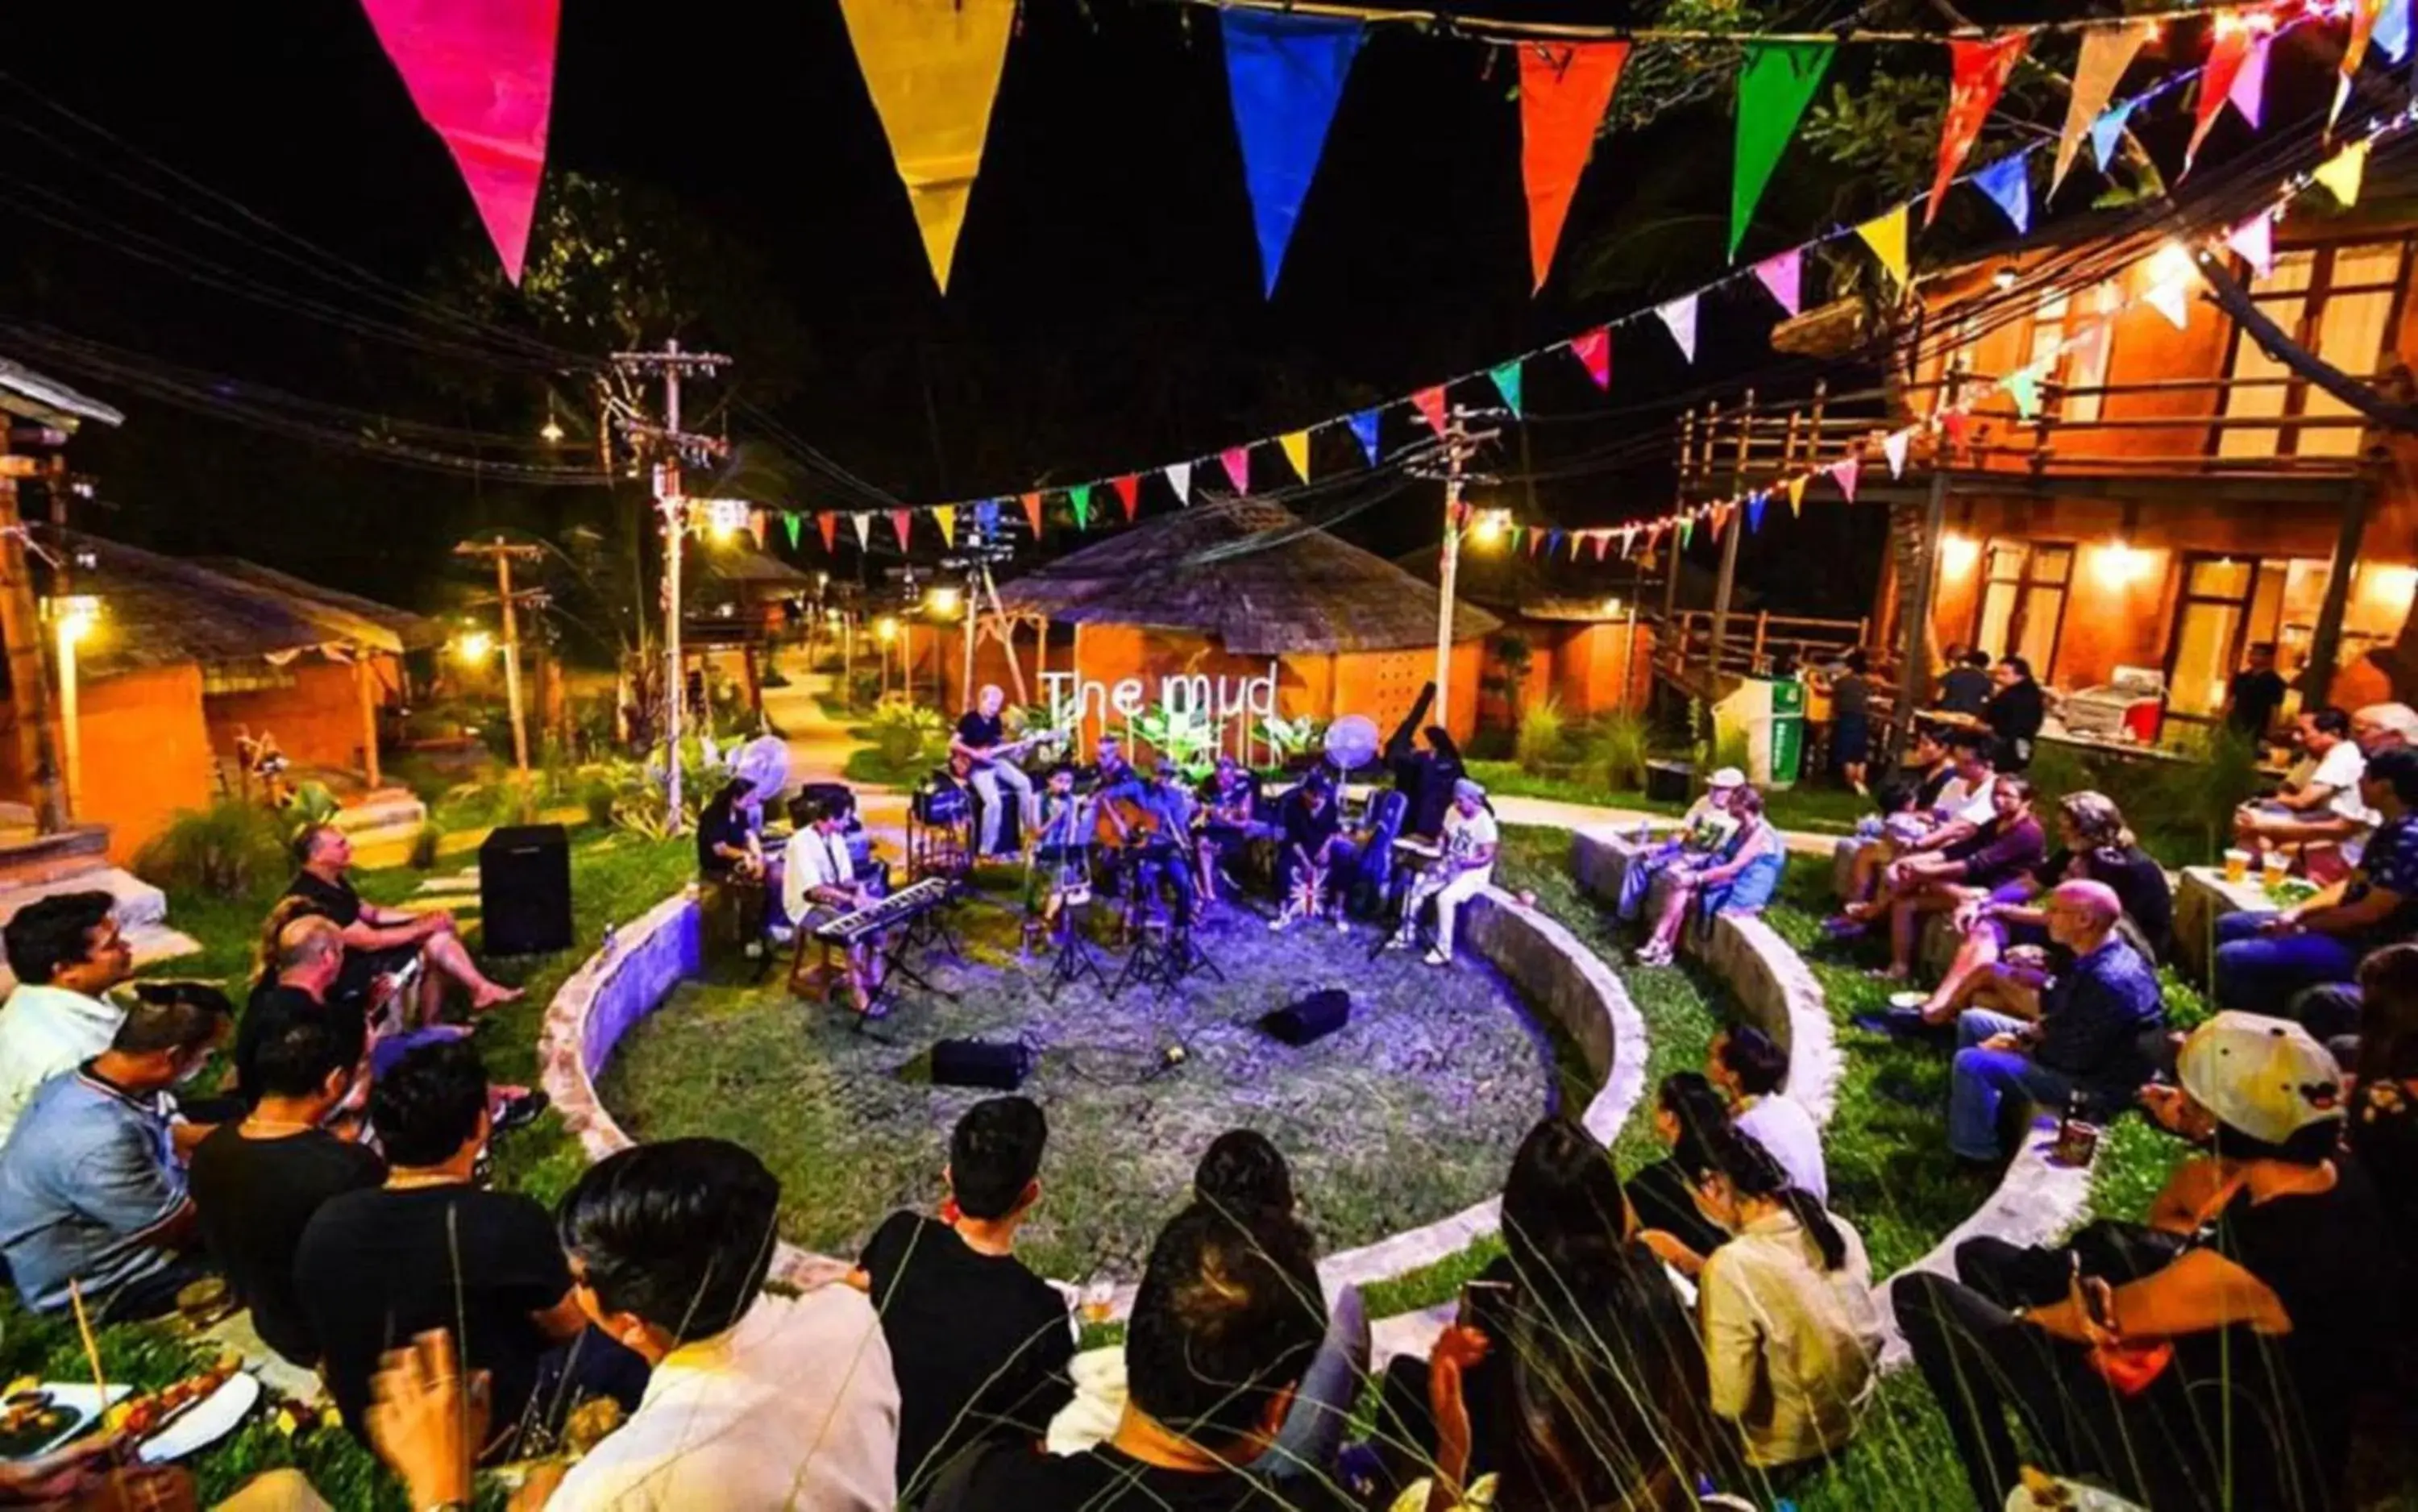 Entertainment, Other Activities in The Mud - Eco Hotel